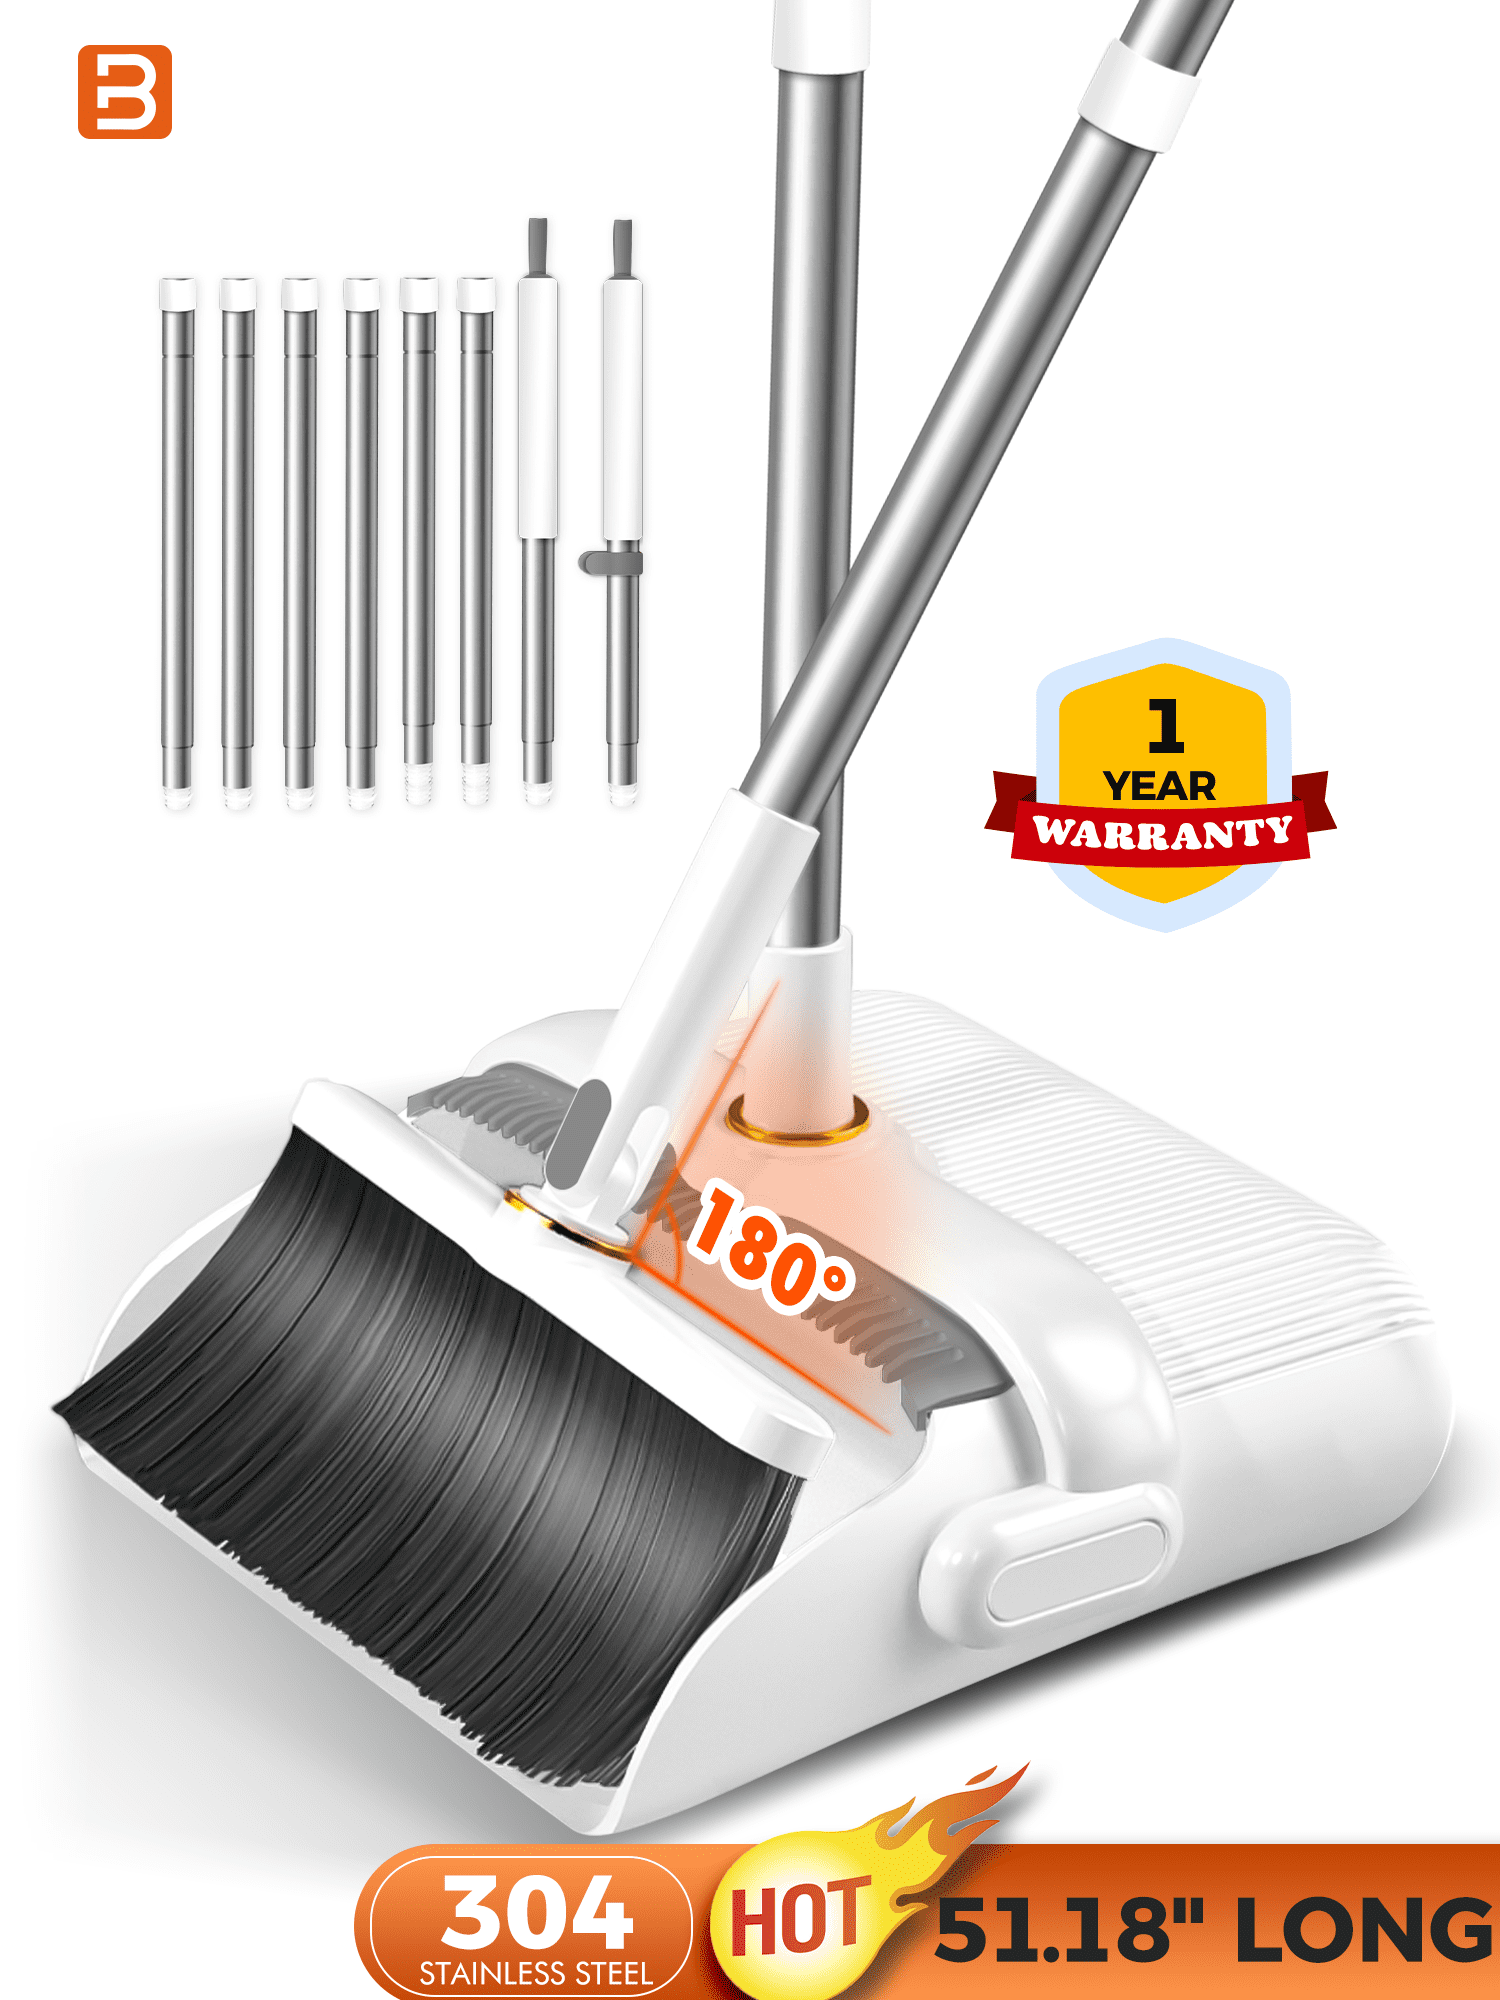 Dustpan and Broom Set plus Squeegee Dustpan Broom Combo with Extendable &  Adjustable Upright Poles to 52.4” Easy to Store Perfect for Kitchen